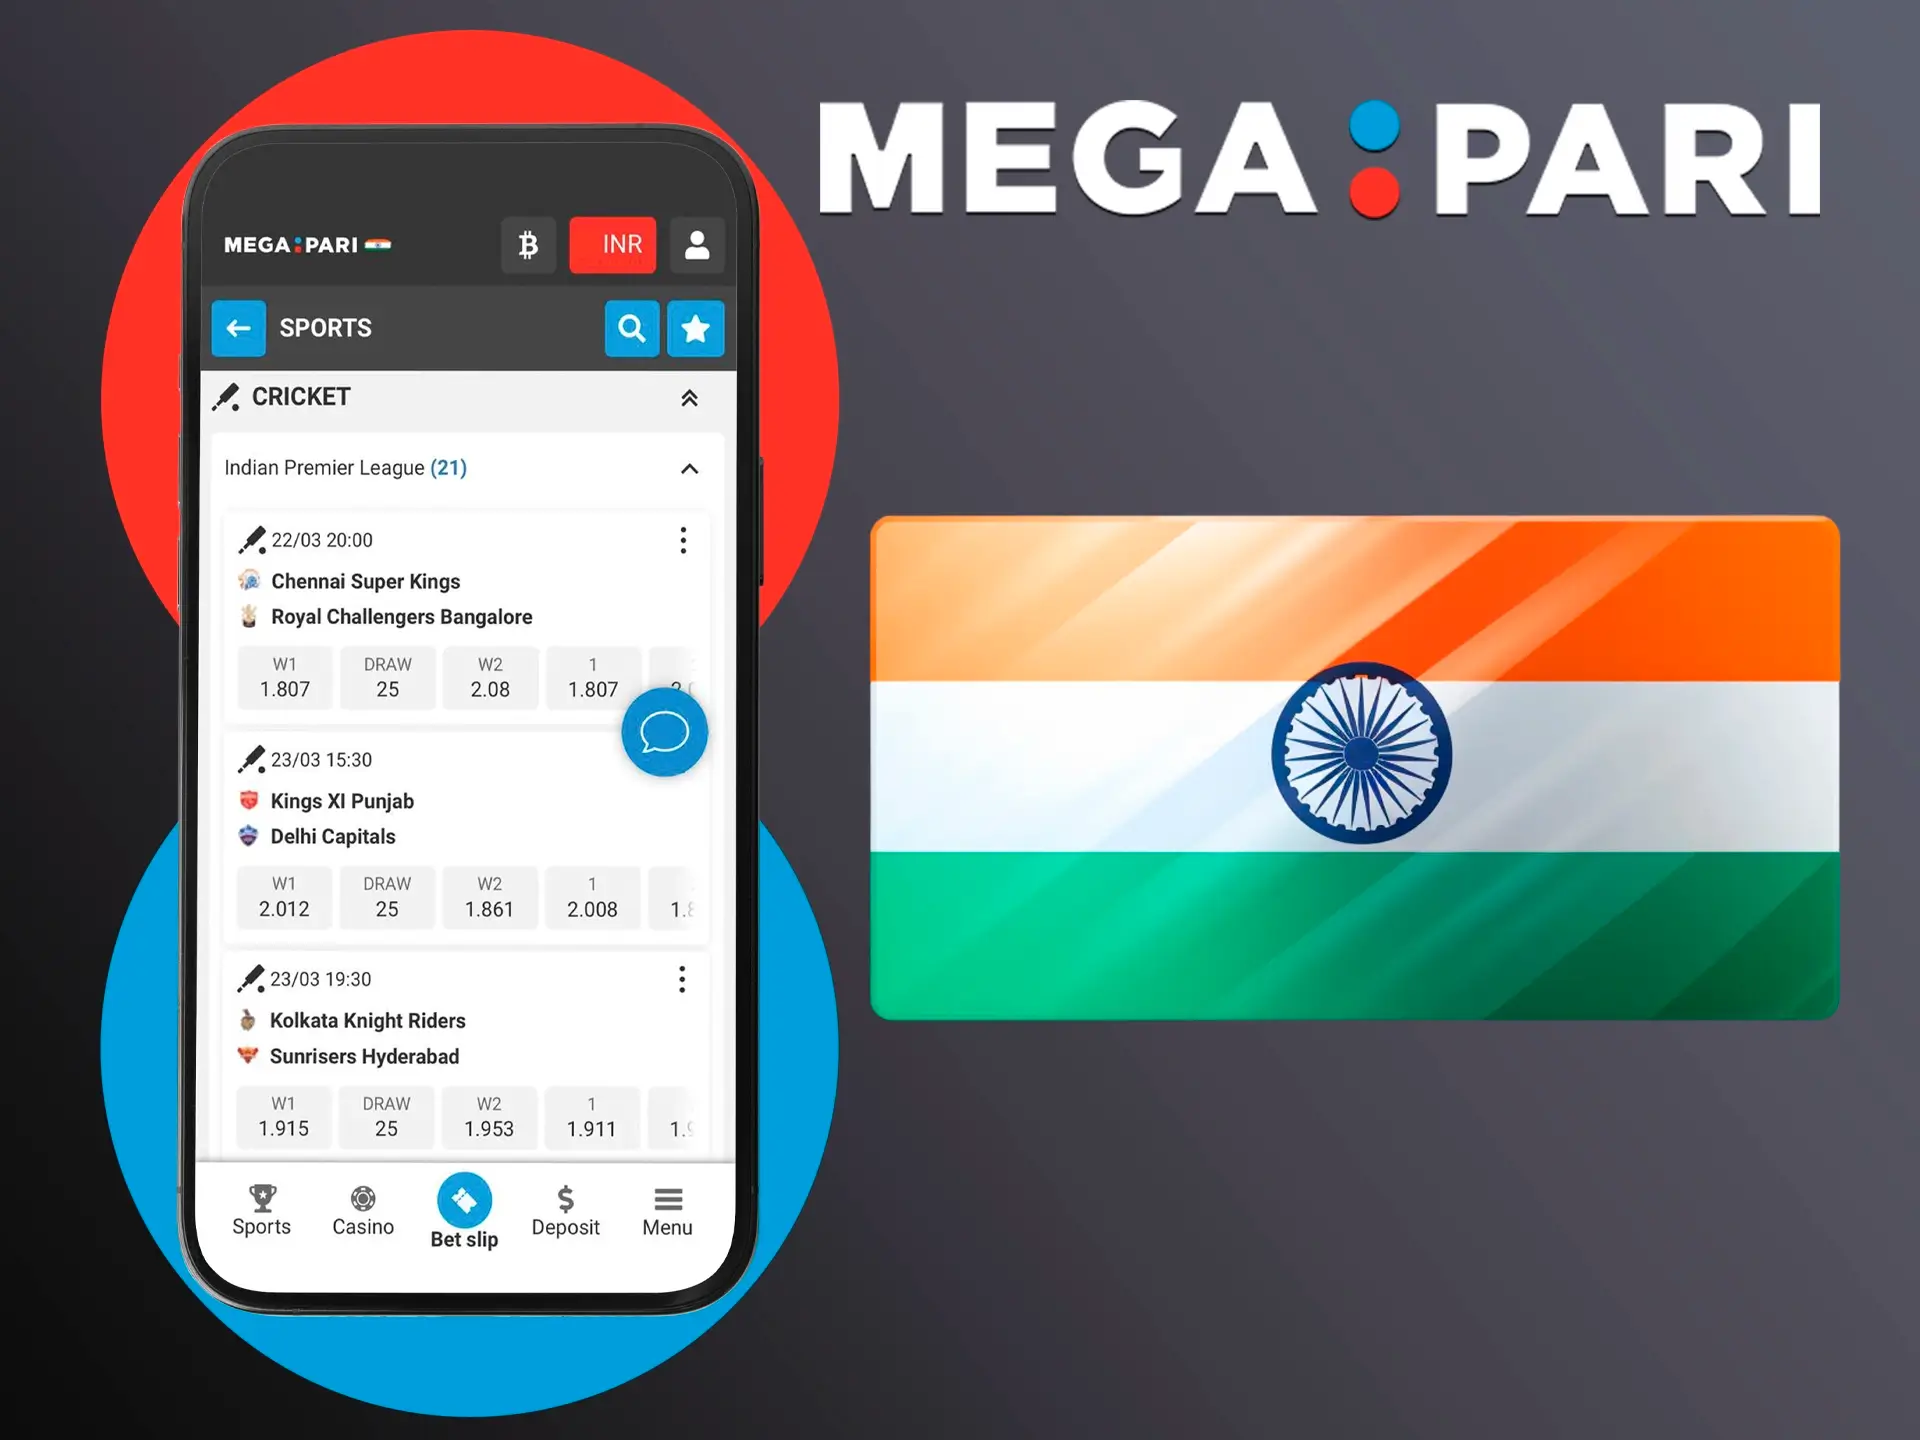 Megapari is widely favoured by users in India, as it is a well-known casino with a big name and high reputation.